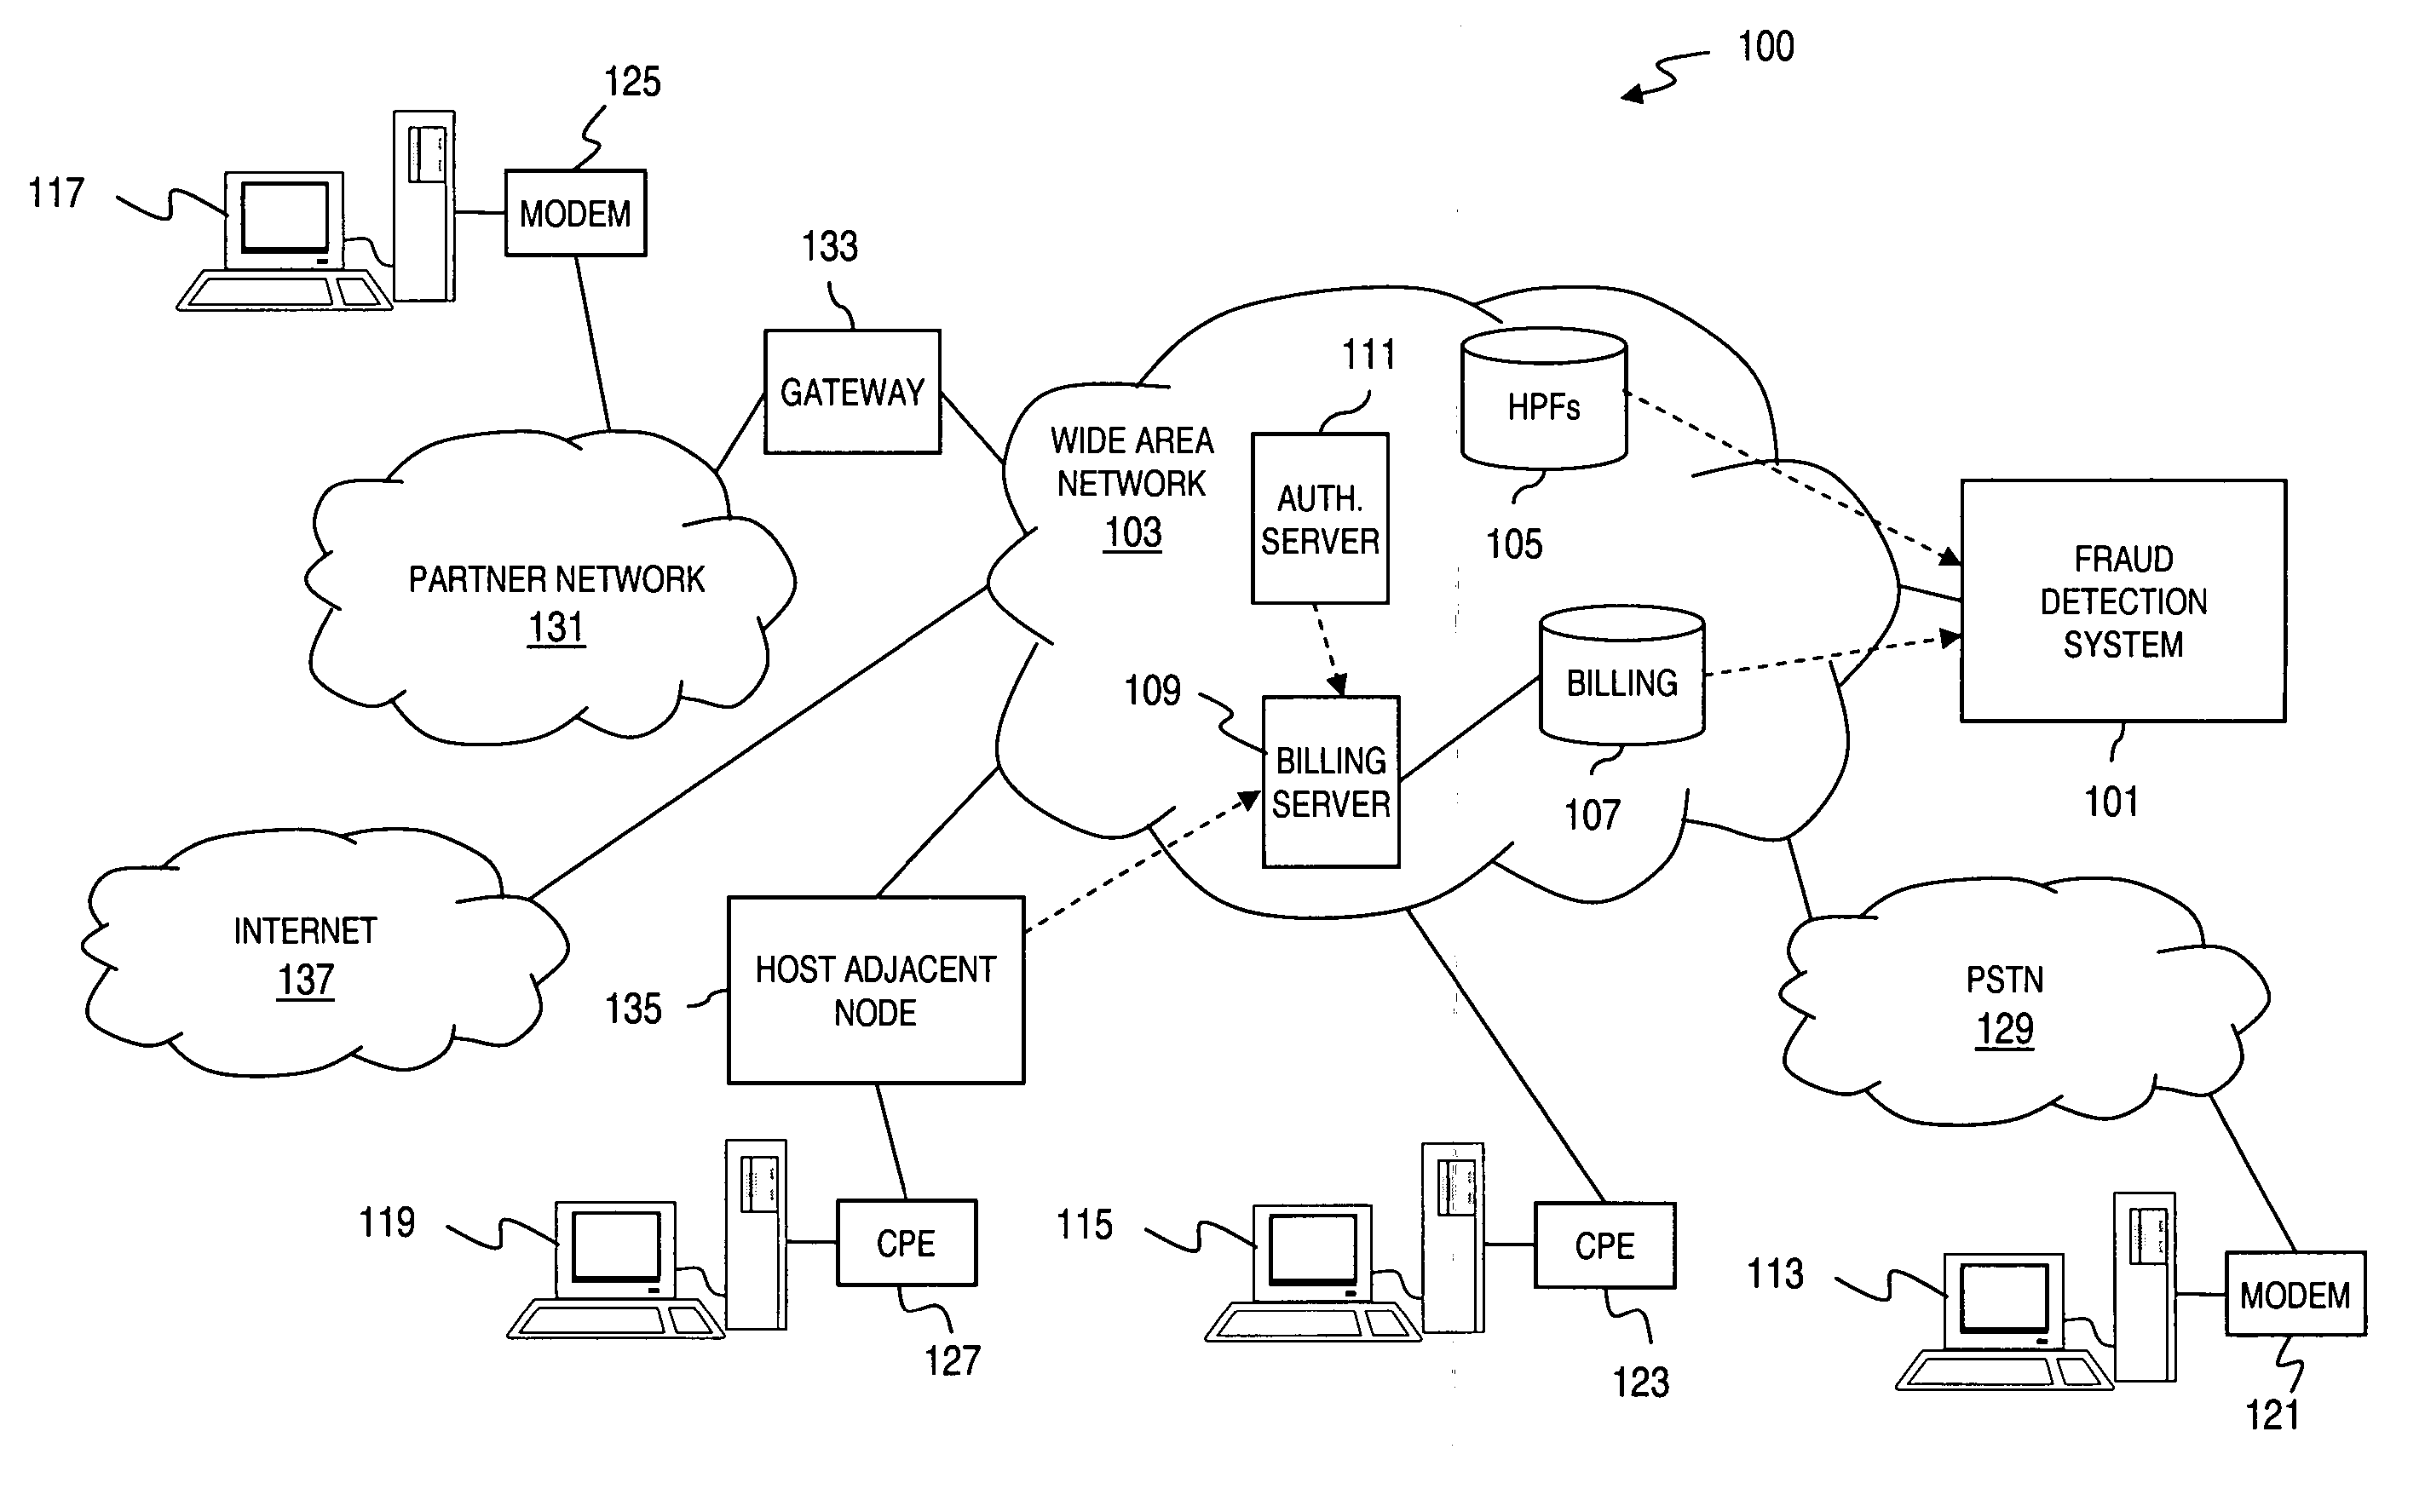 Method and apparatus for providing fraud detection using hot or cold originating attributes